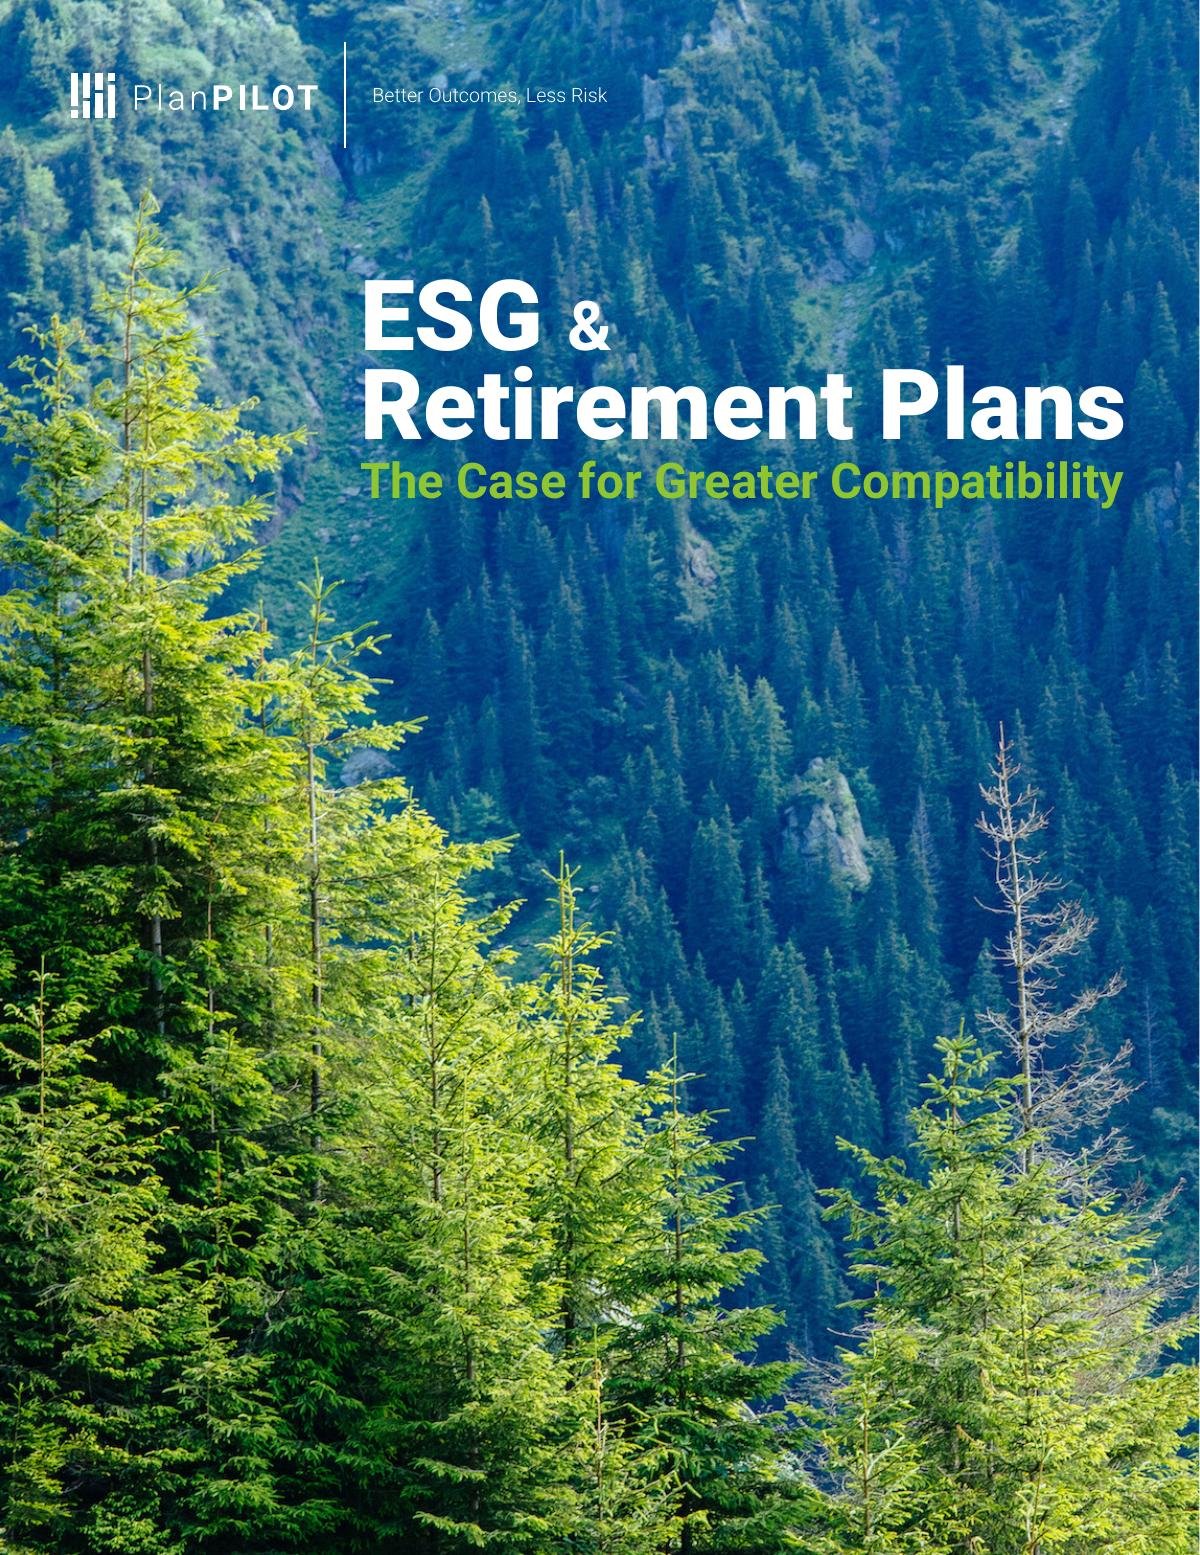 ESG & Retirement Plans: The Case for Greater Compatibility